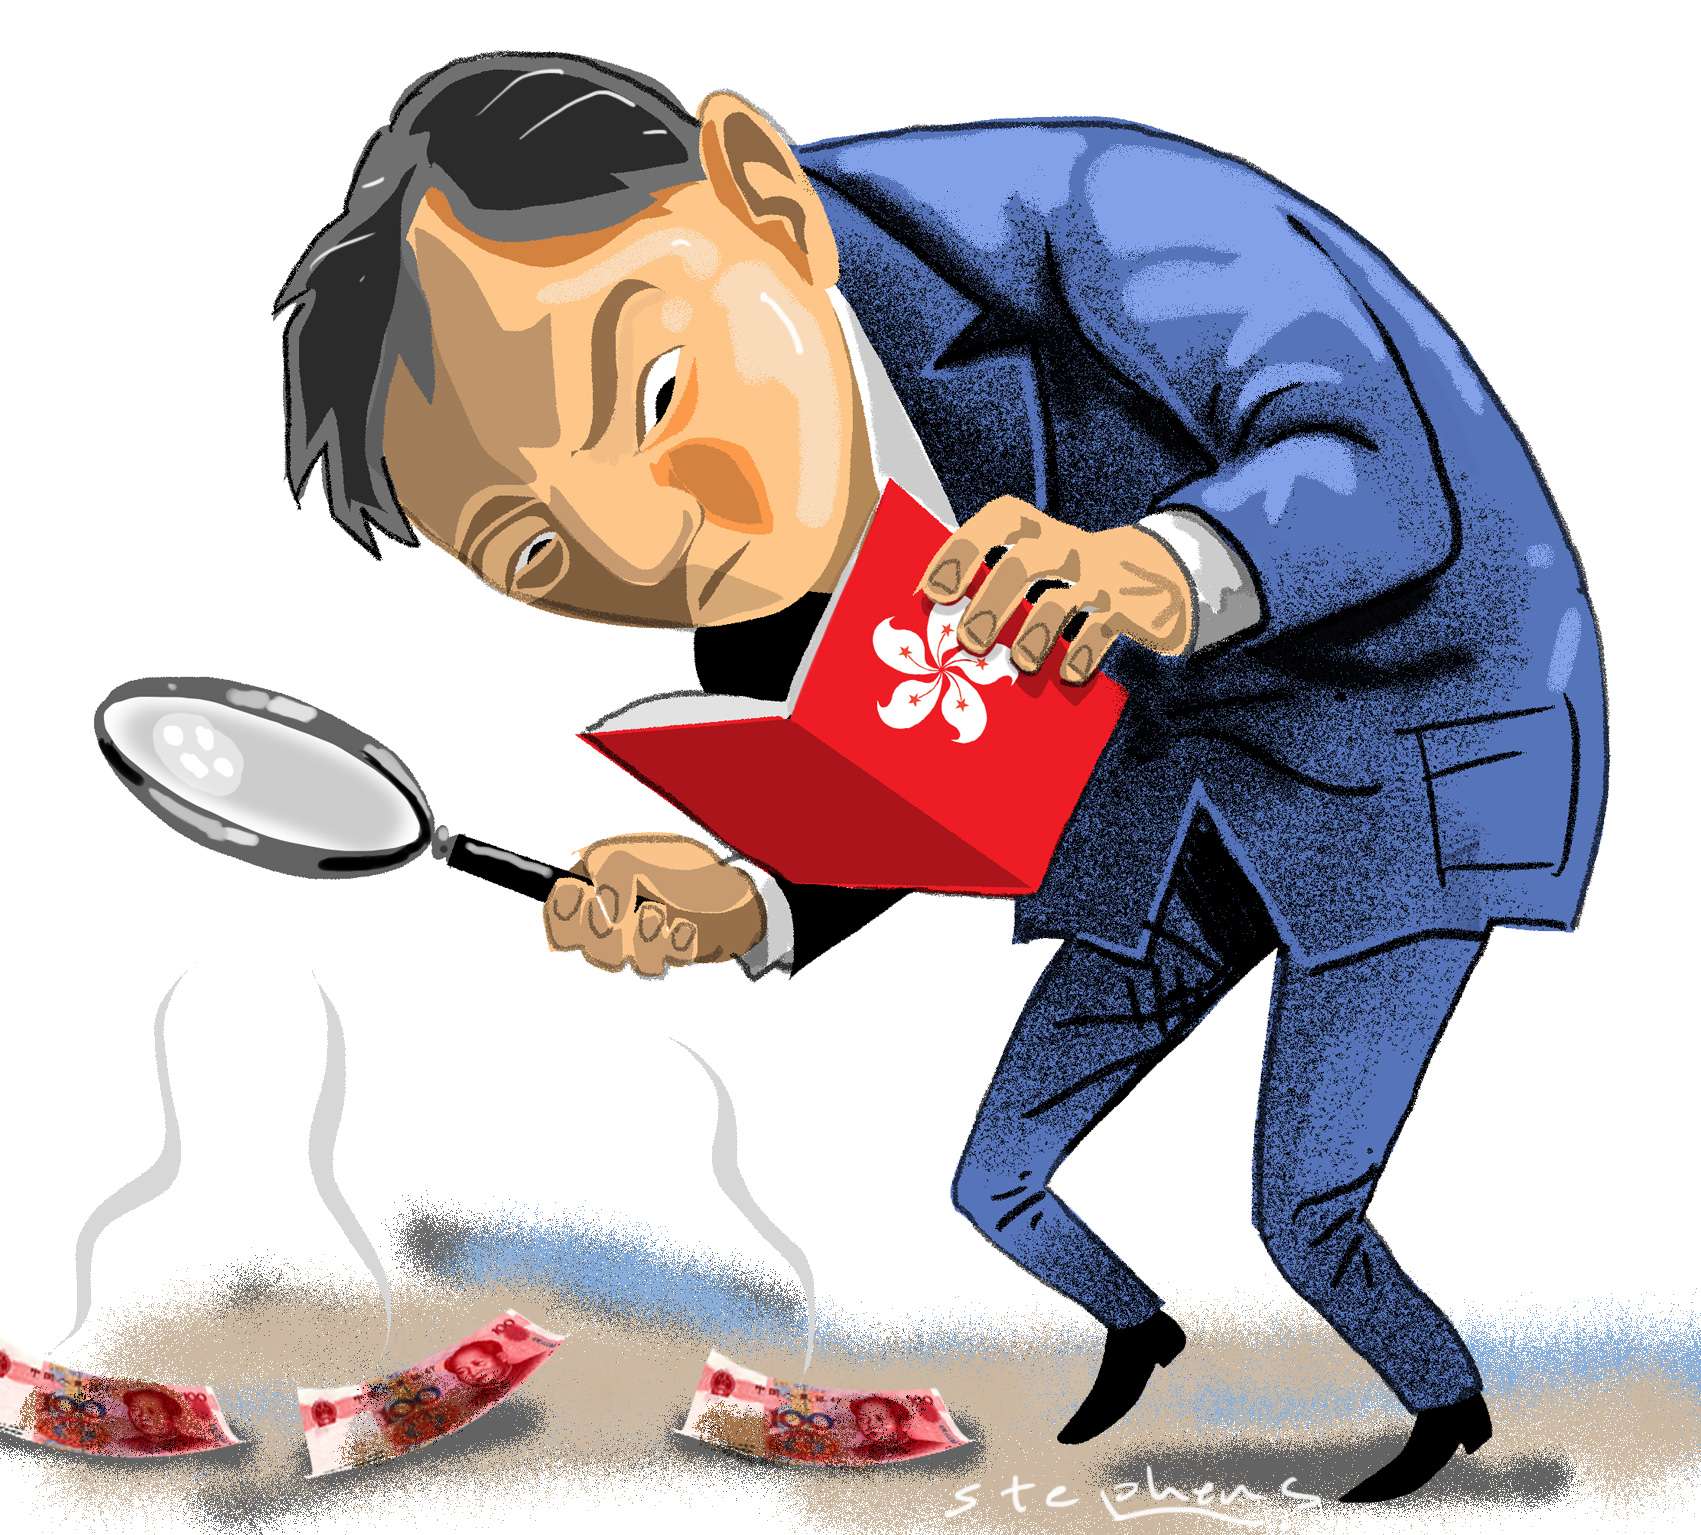 Tony Kwok says Beijing’s plan to set up a super agency to combat the scourge is a big step in the right direction, and shows it is adopting best practices from elsewhere